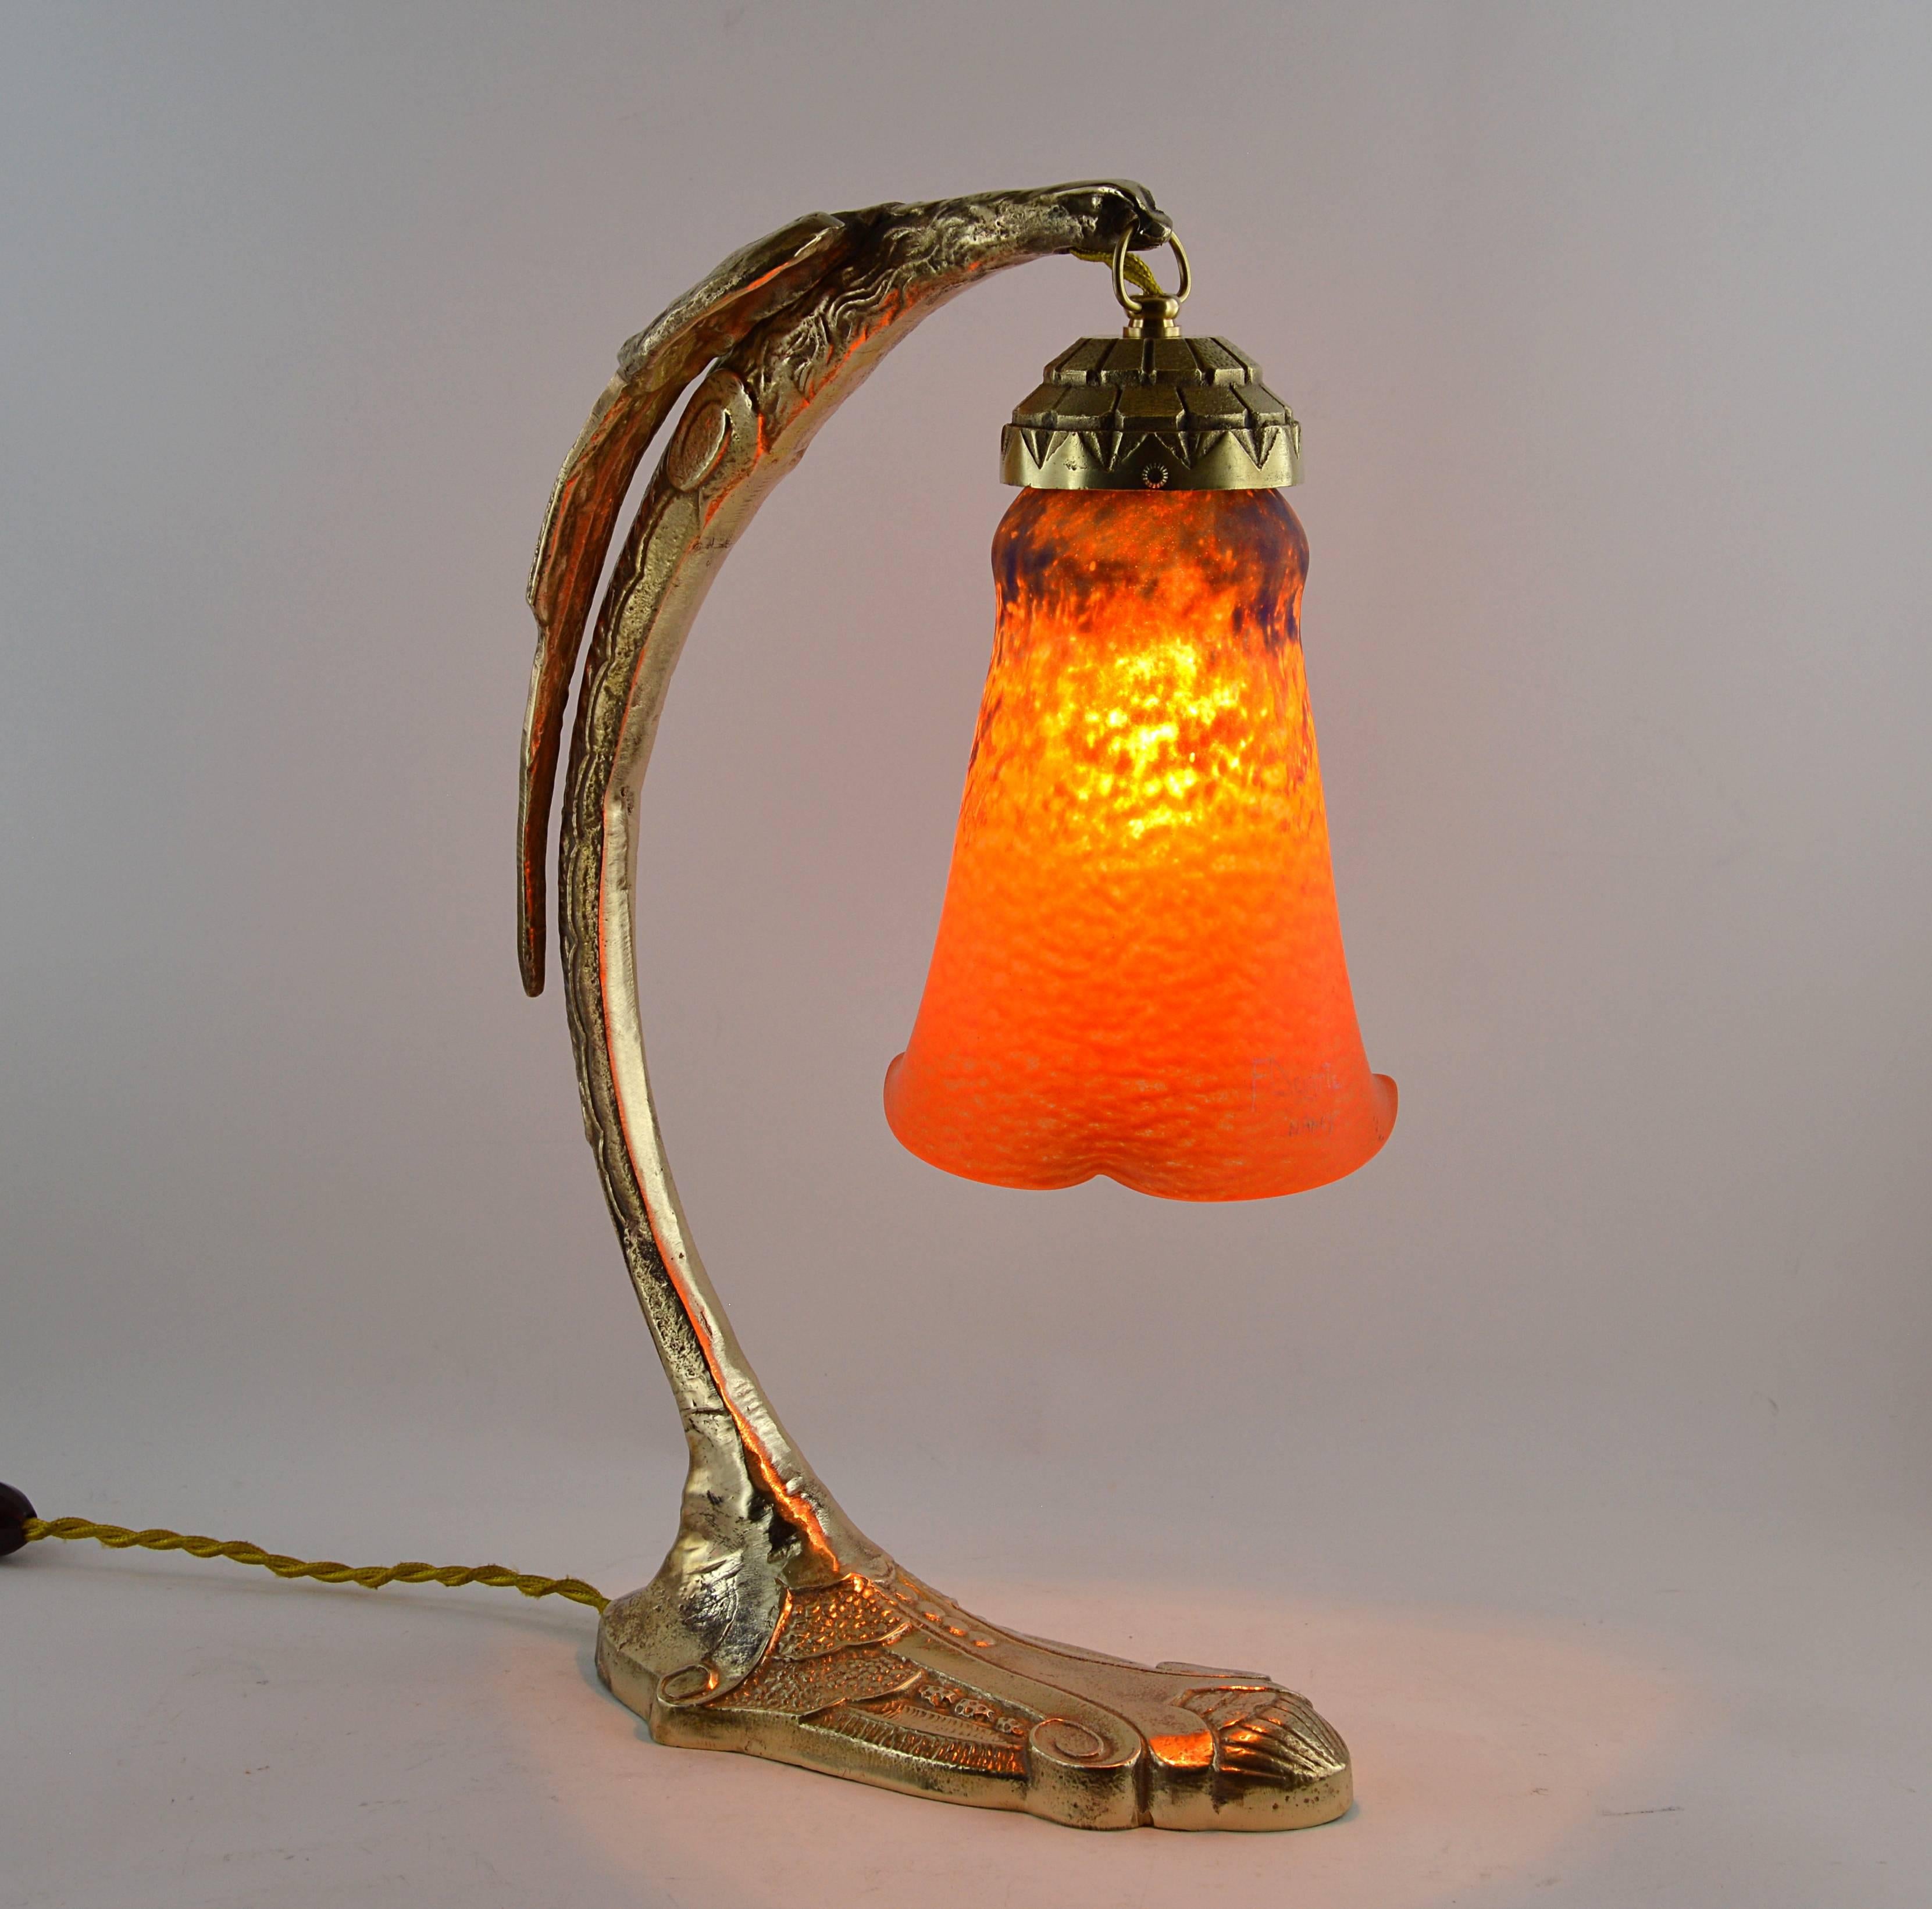 French Art Deco desk table lamp by Andre Delatte, Jarville (Nancy), late 1920s. The shade is made of blown double glass with powder application between both layers. Colors are red/orange and dark blue. At the bottom, three points stretched with